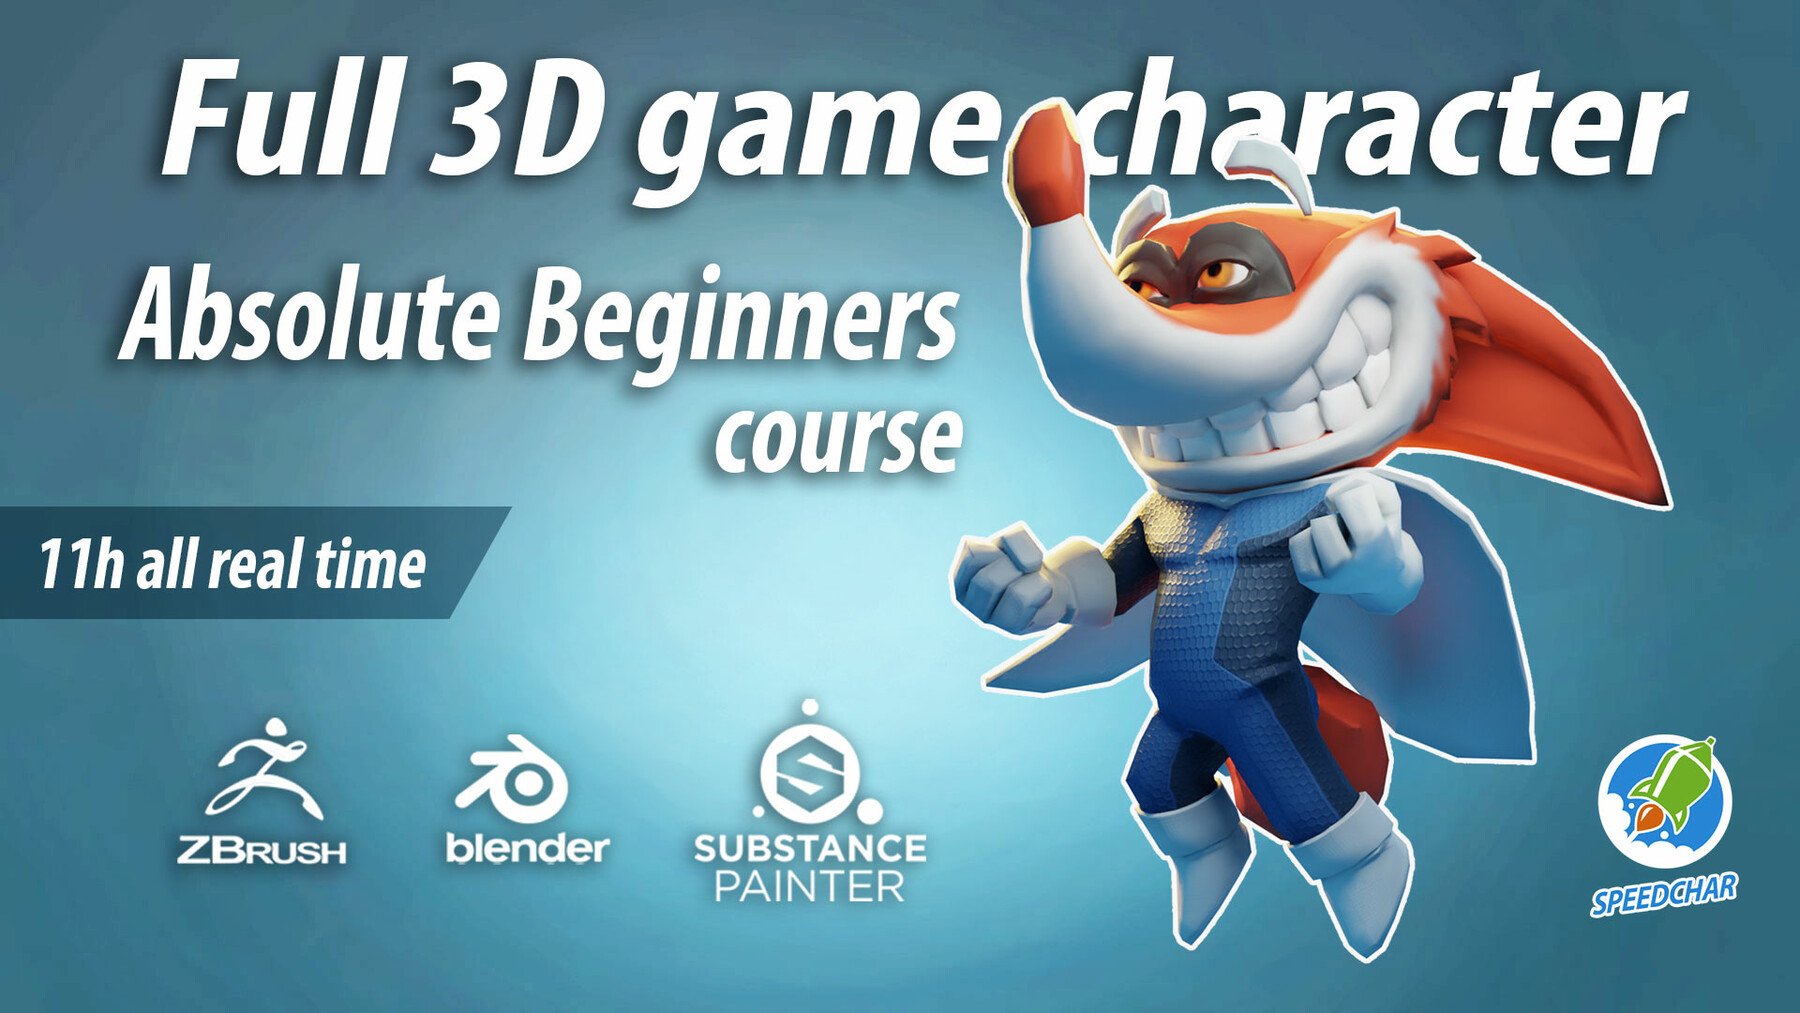 Full 3D Game Character for Absolute Beginners